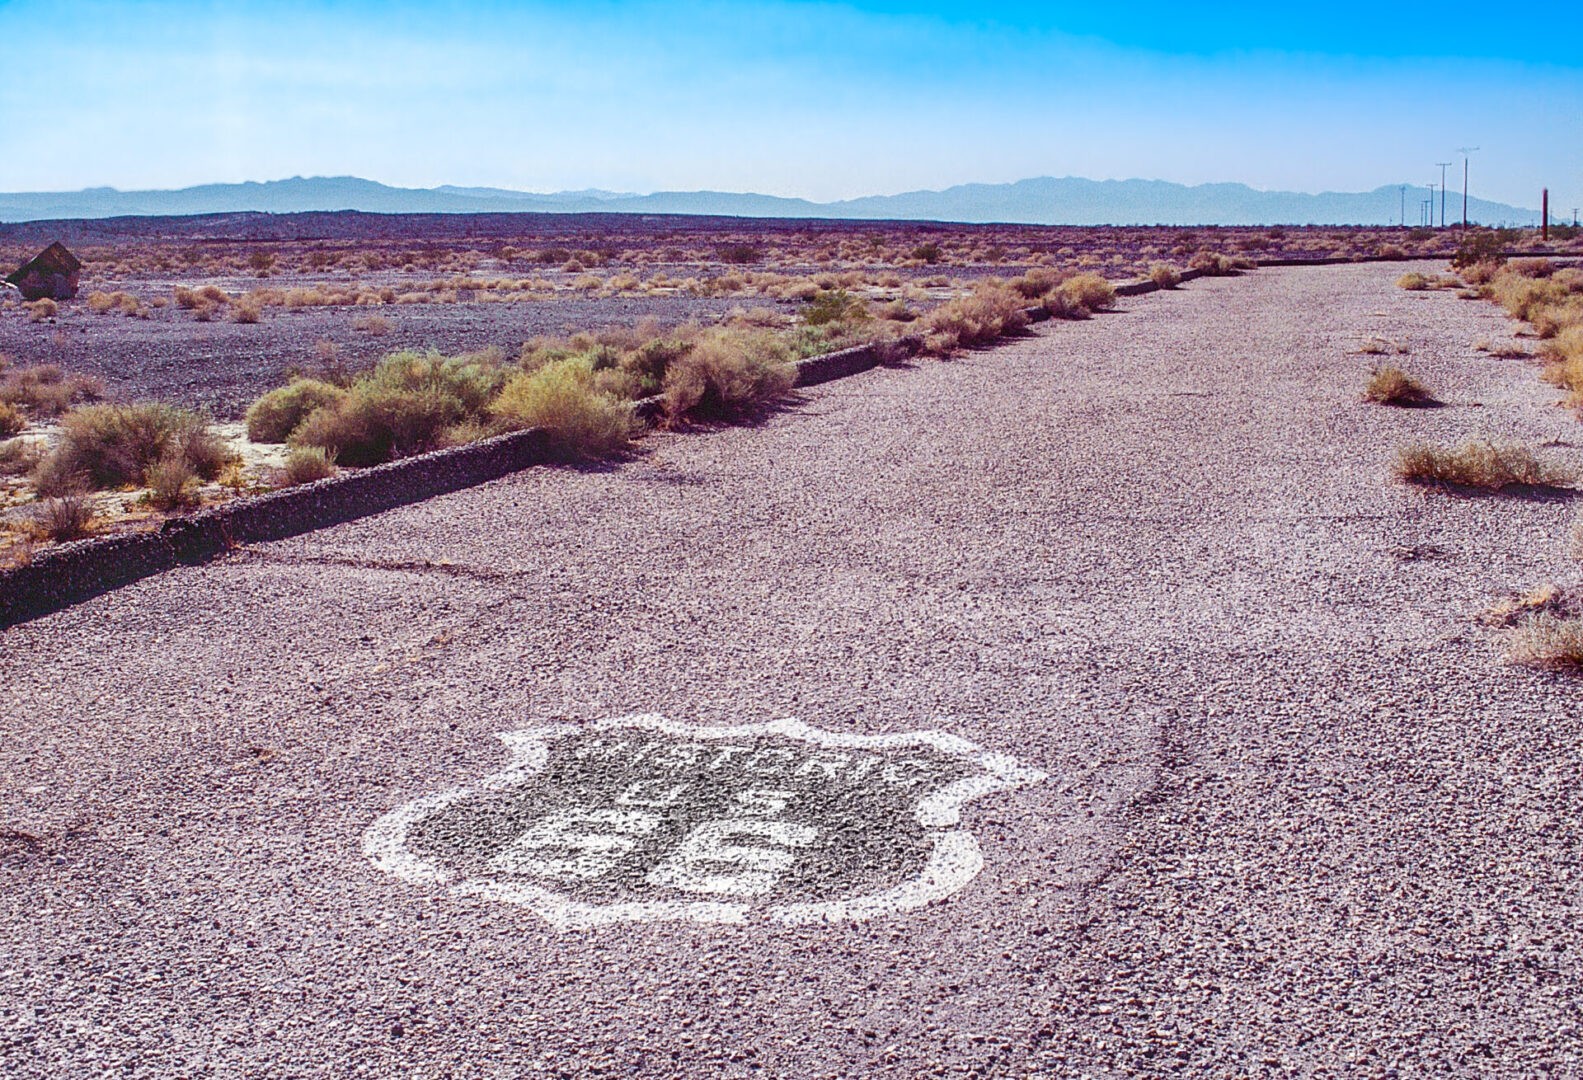 Original Historic Route 66 roadway in the Mojave Desert with Route 66 shield painted on the road